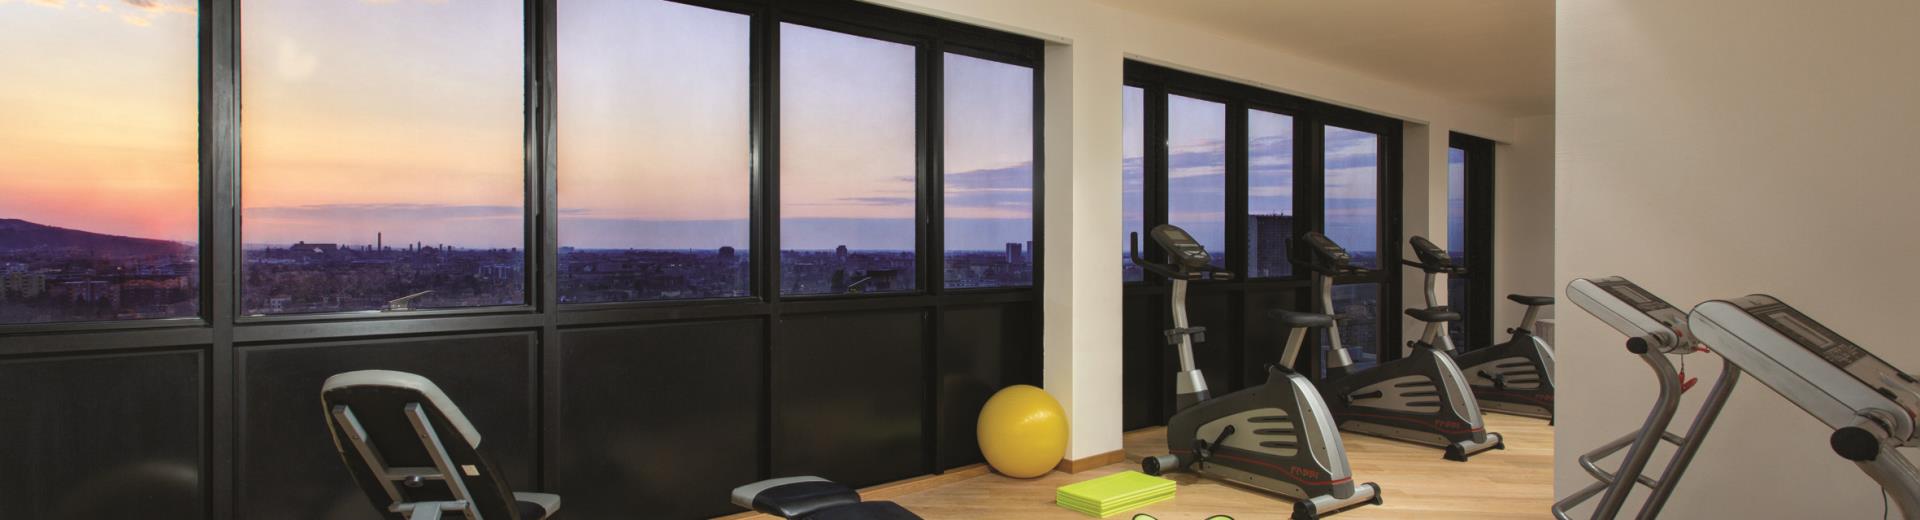 Best Westen Plus Tower Hotel Bologna - Sala Fitness Panoramica